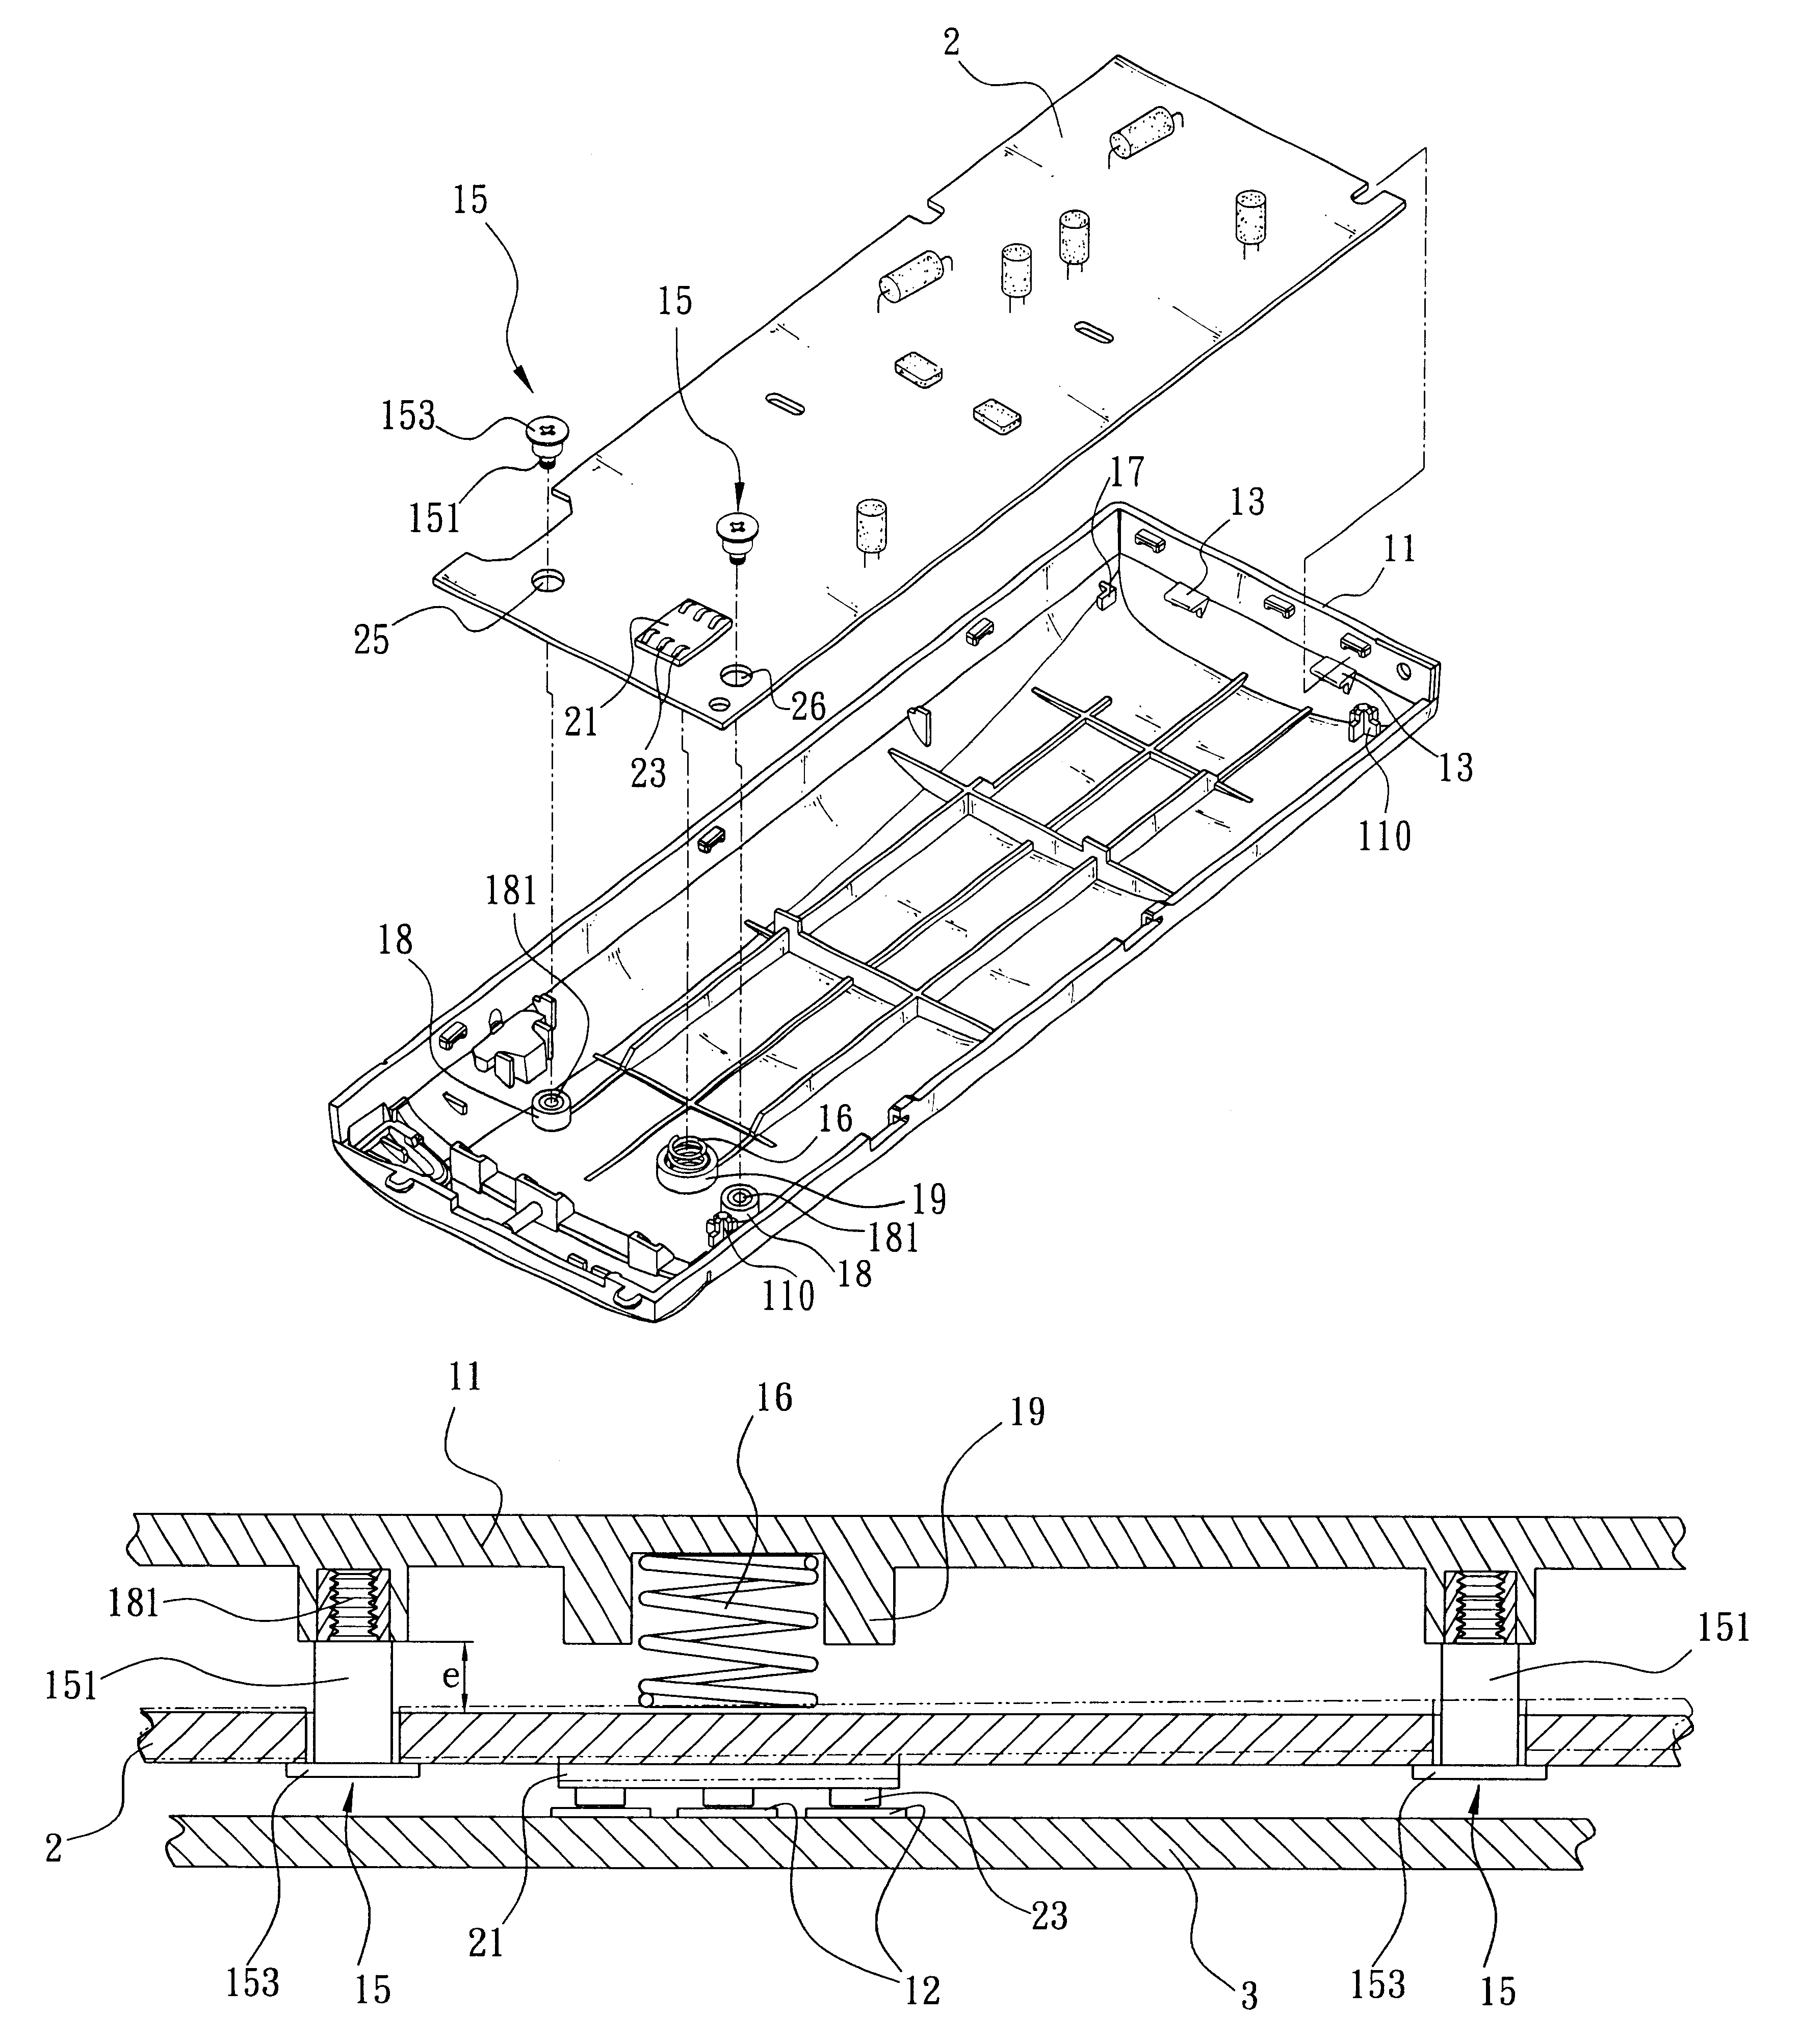 Modular machine board structure capable of automatically correcting the contact travel for an electronic device